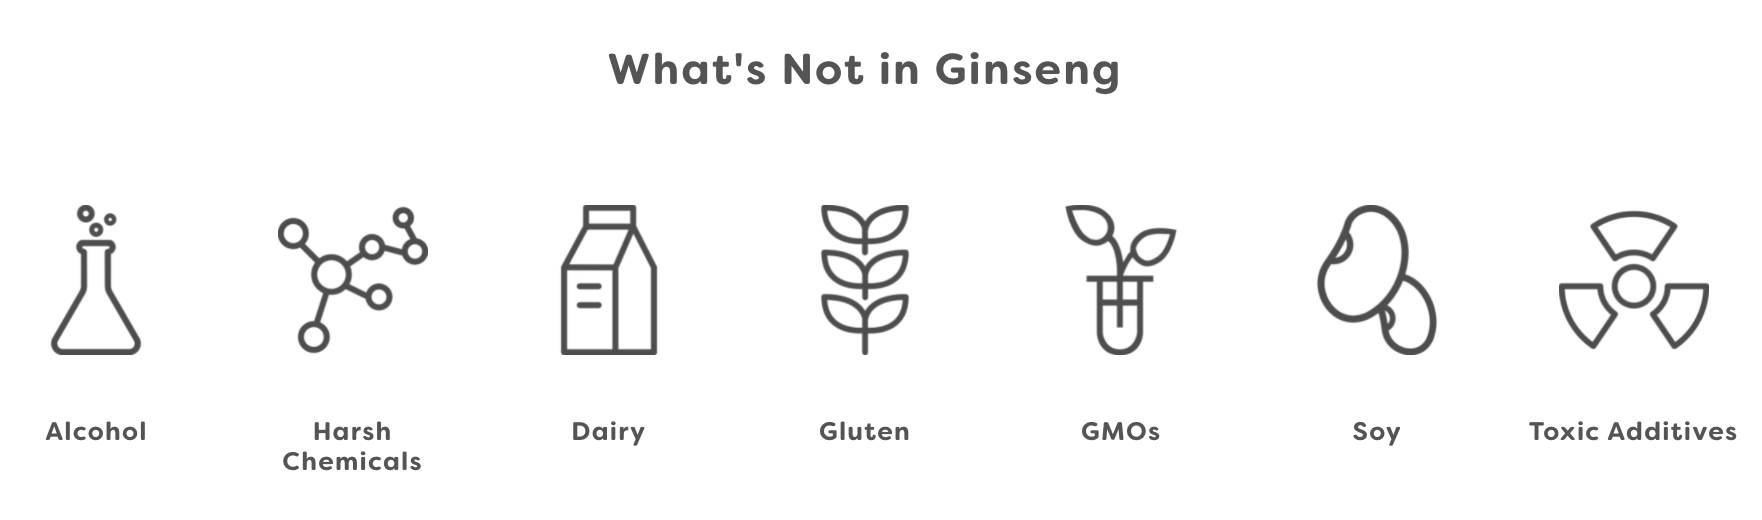 What is not in Ginseng